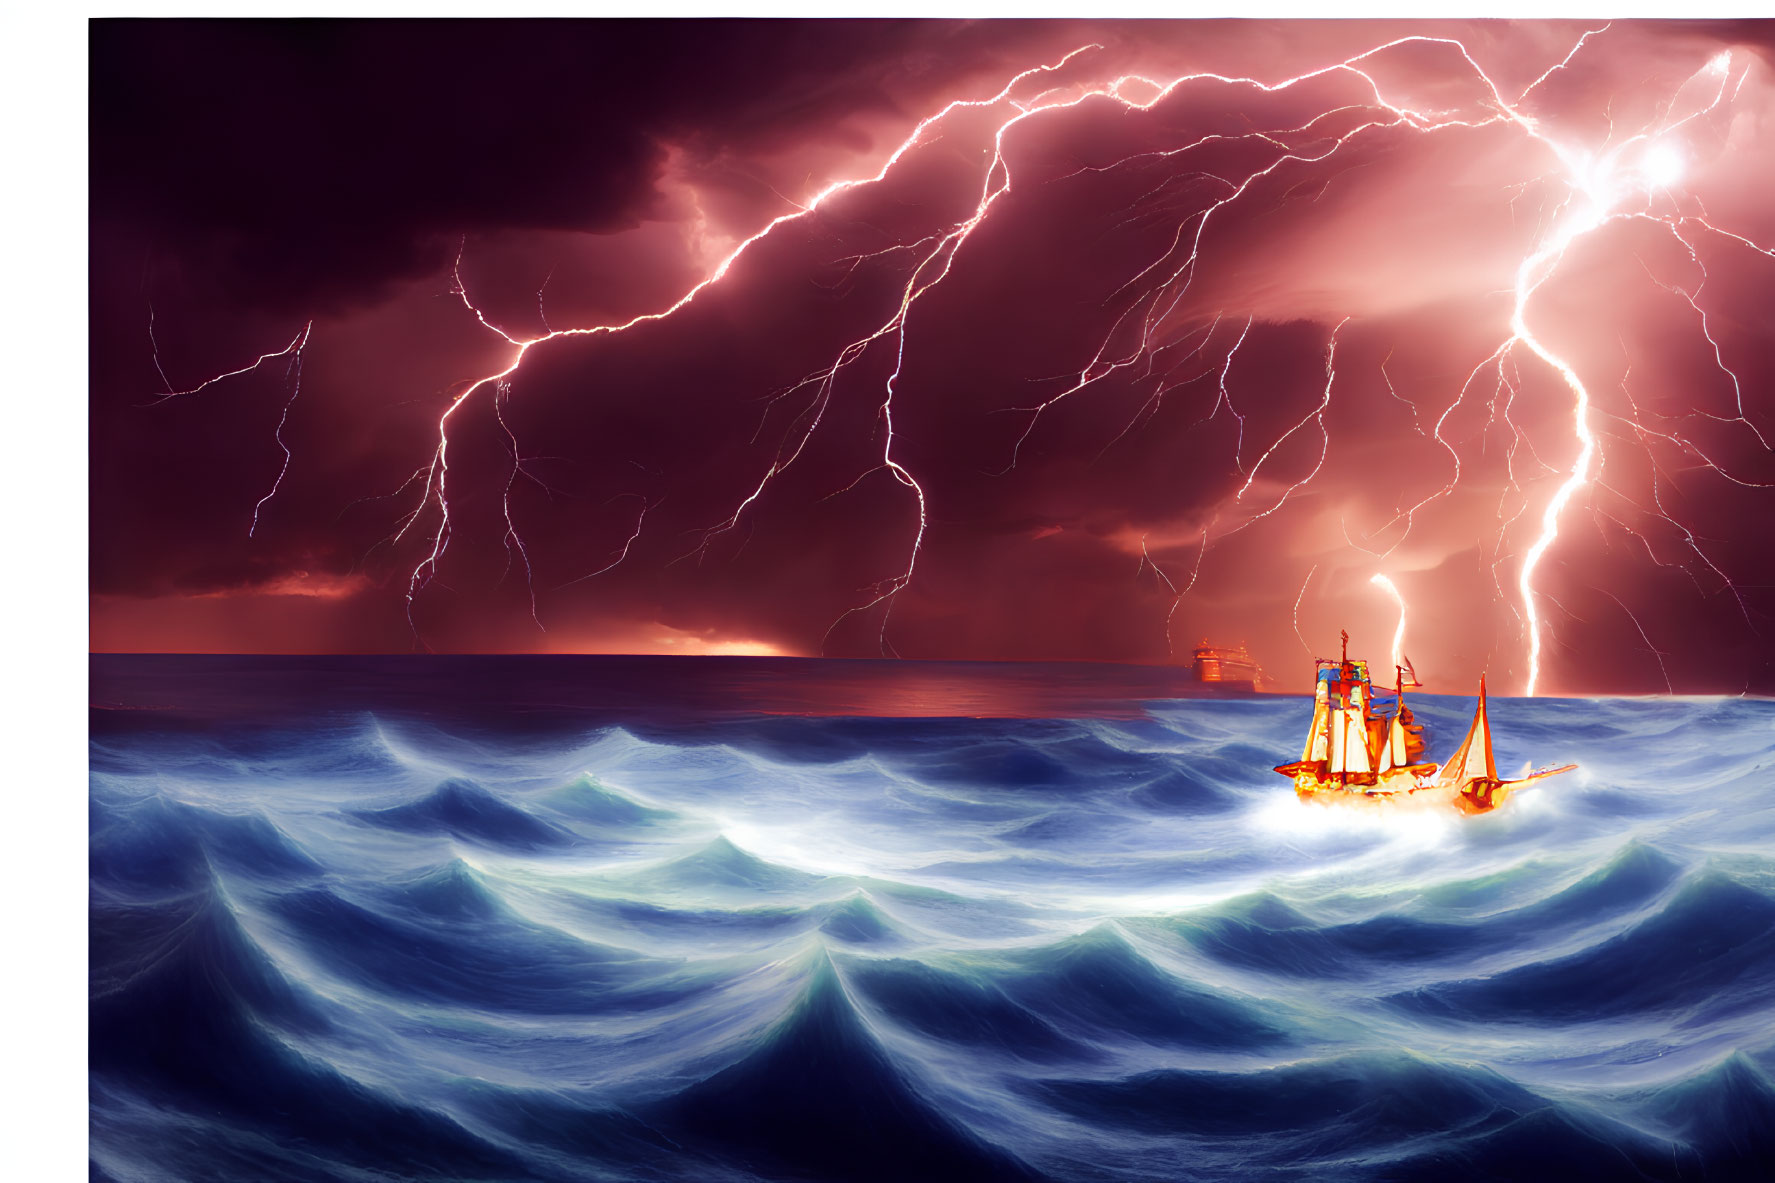 Stormy seascape with ship in thunderstorm.